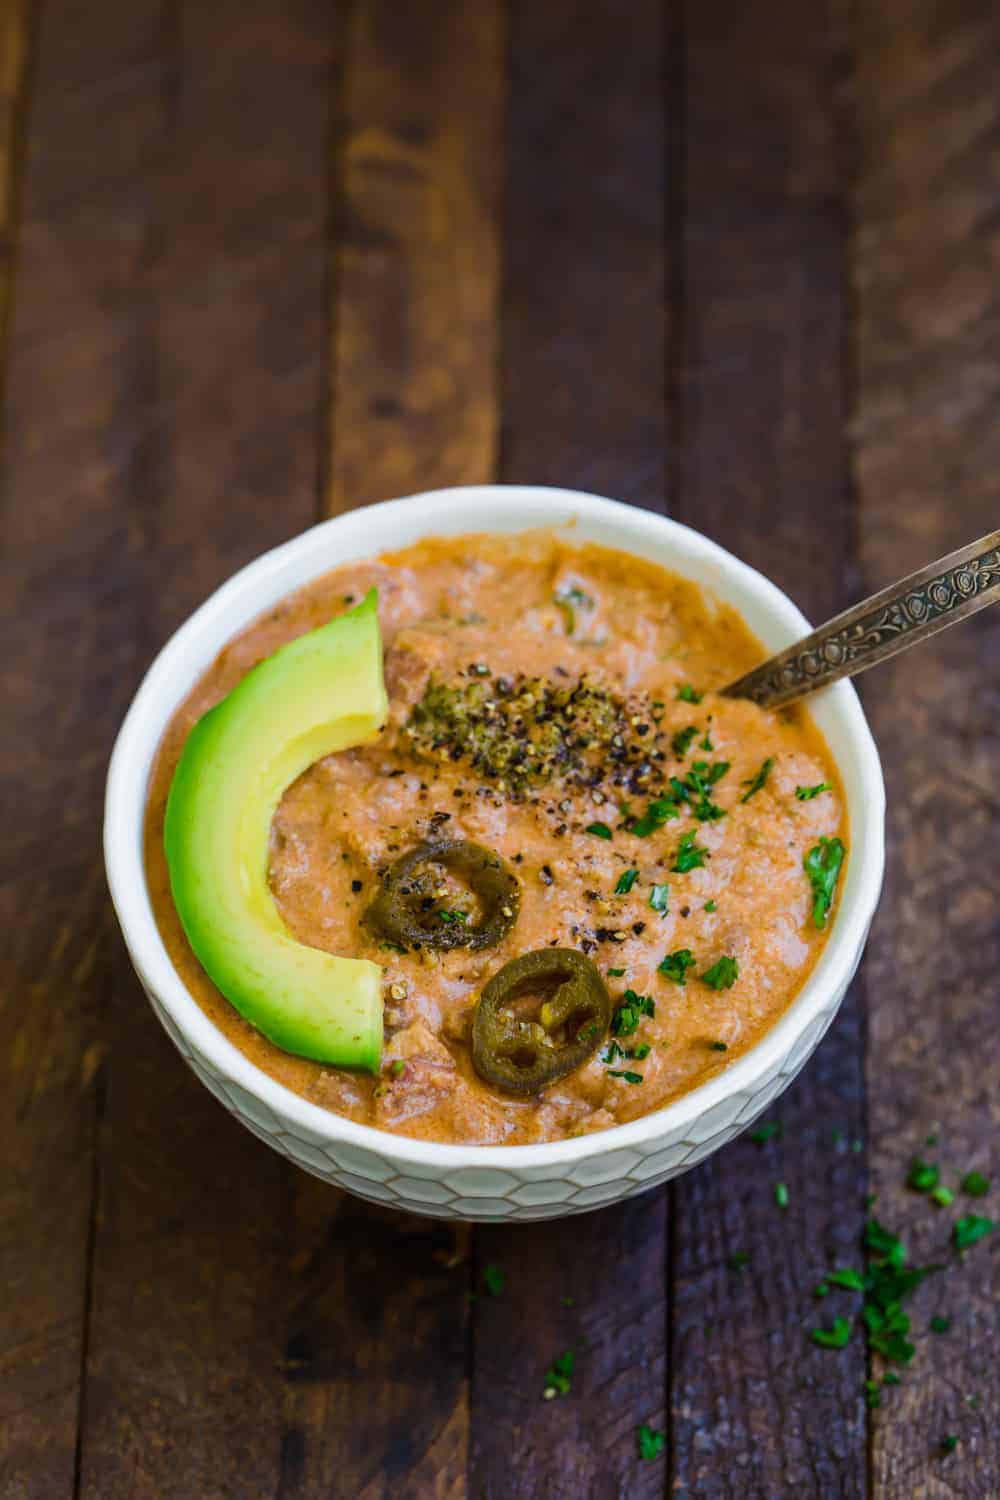 Whole30 Low Carb Cheeseburger Soup | easy low carb cheeseburger soup | keto cheeseburger soup | whole30 cheeseburger soup | dairy free soup | paleo soup | Whole30 cheeseburger soup recipe | quick and easy soup recipes || The Movement Menu #whole30soup #lowcarb #keto #whole30 #glutenfree via @themovementmenu via @themovementmenu